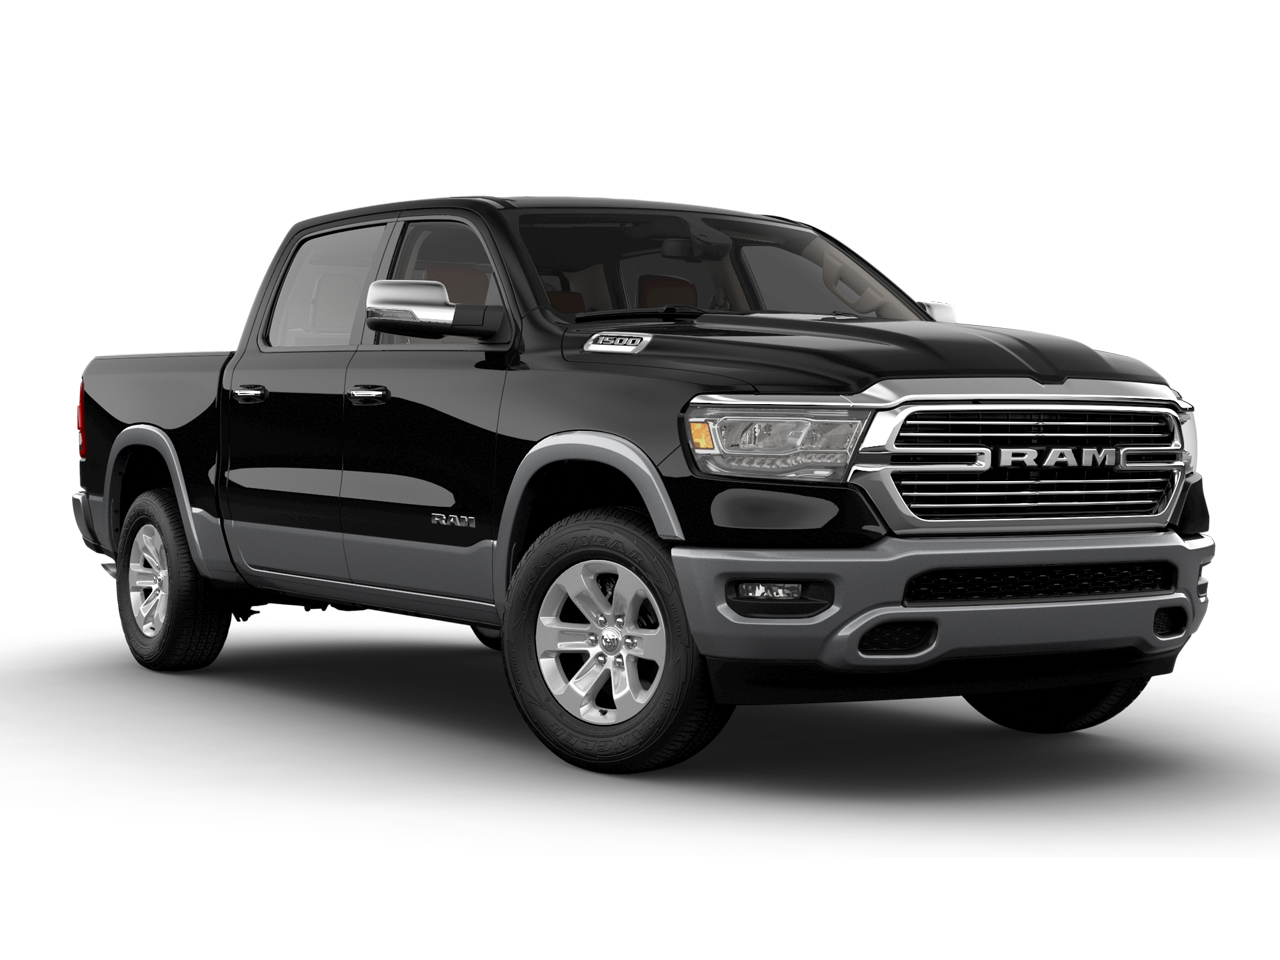 Test Drive a 2019 RAM 1500 at Team Chrysler Jeep Dodge RAM in Toronto